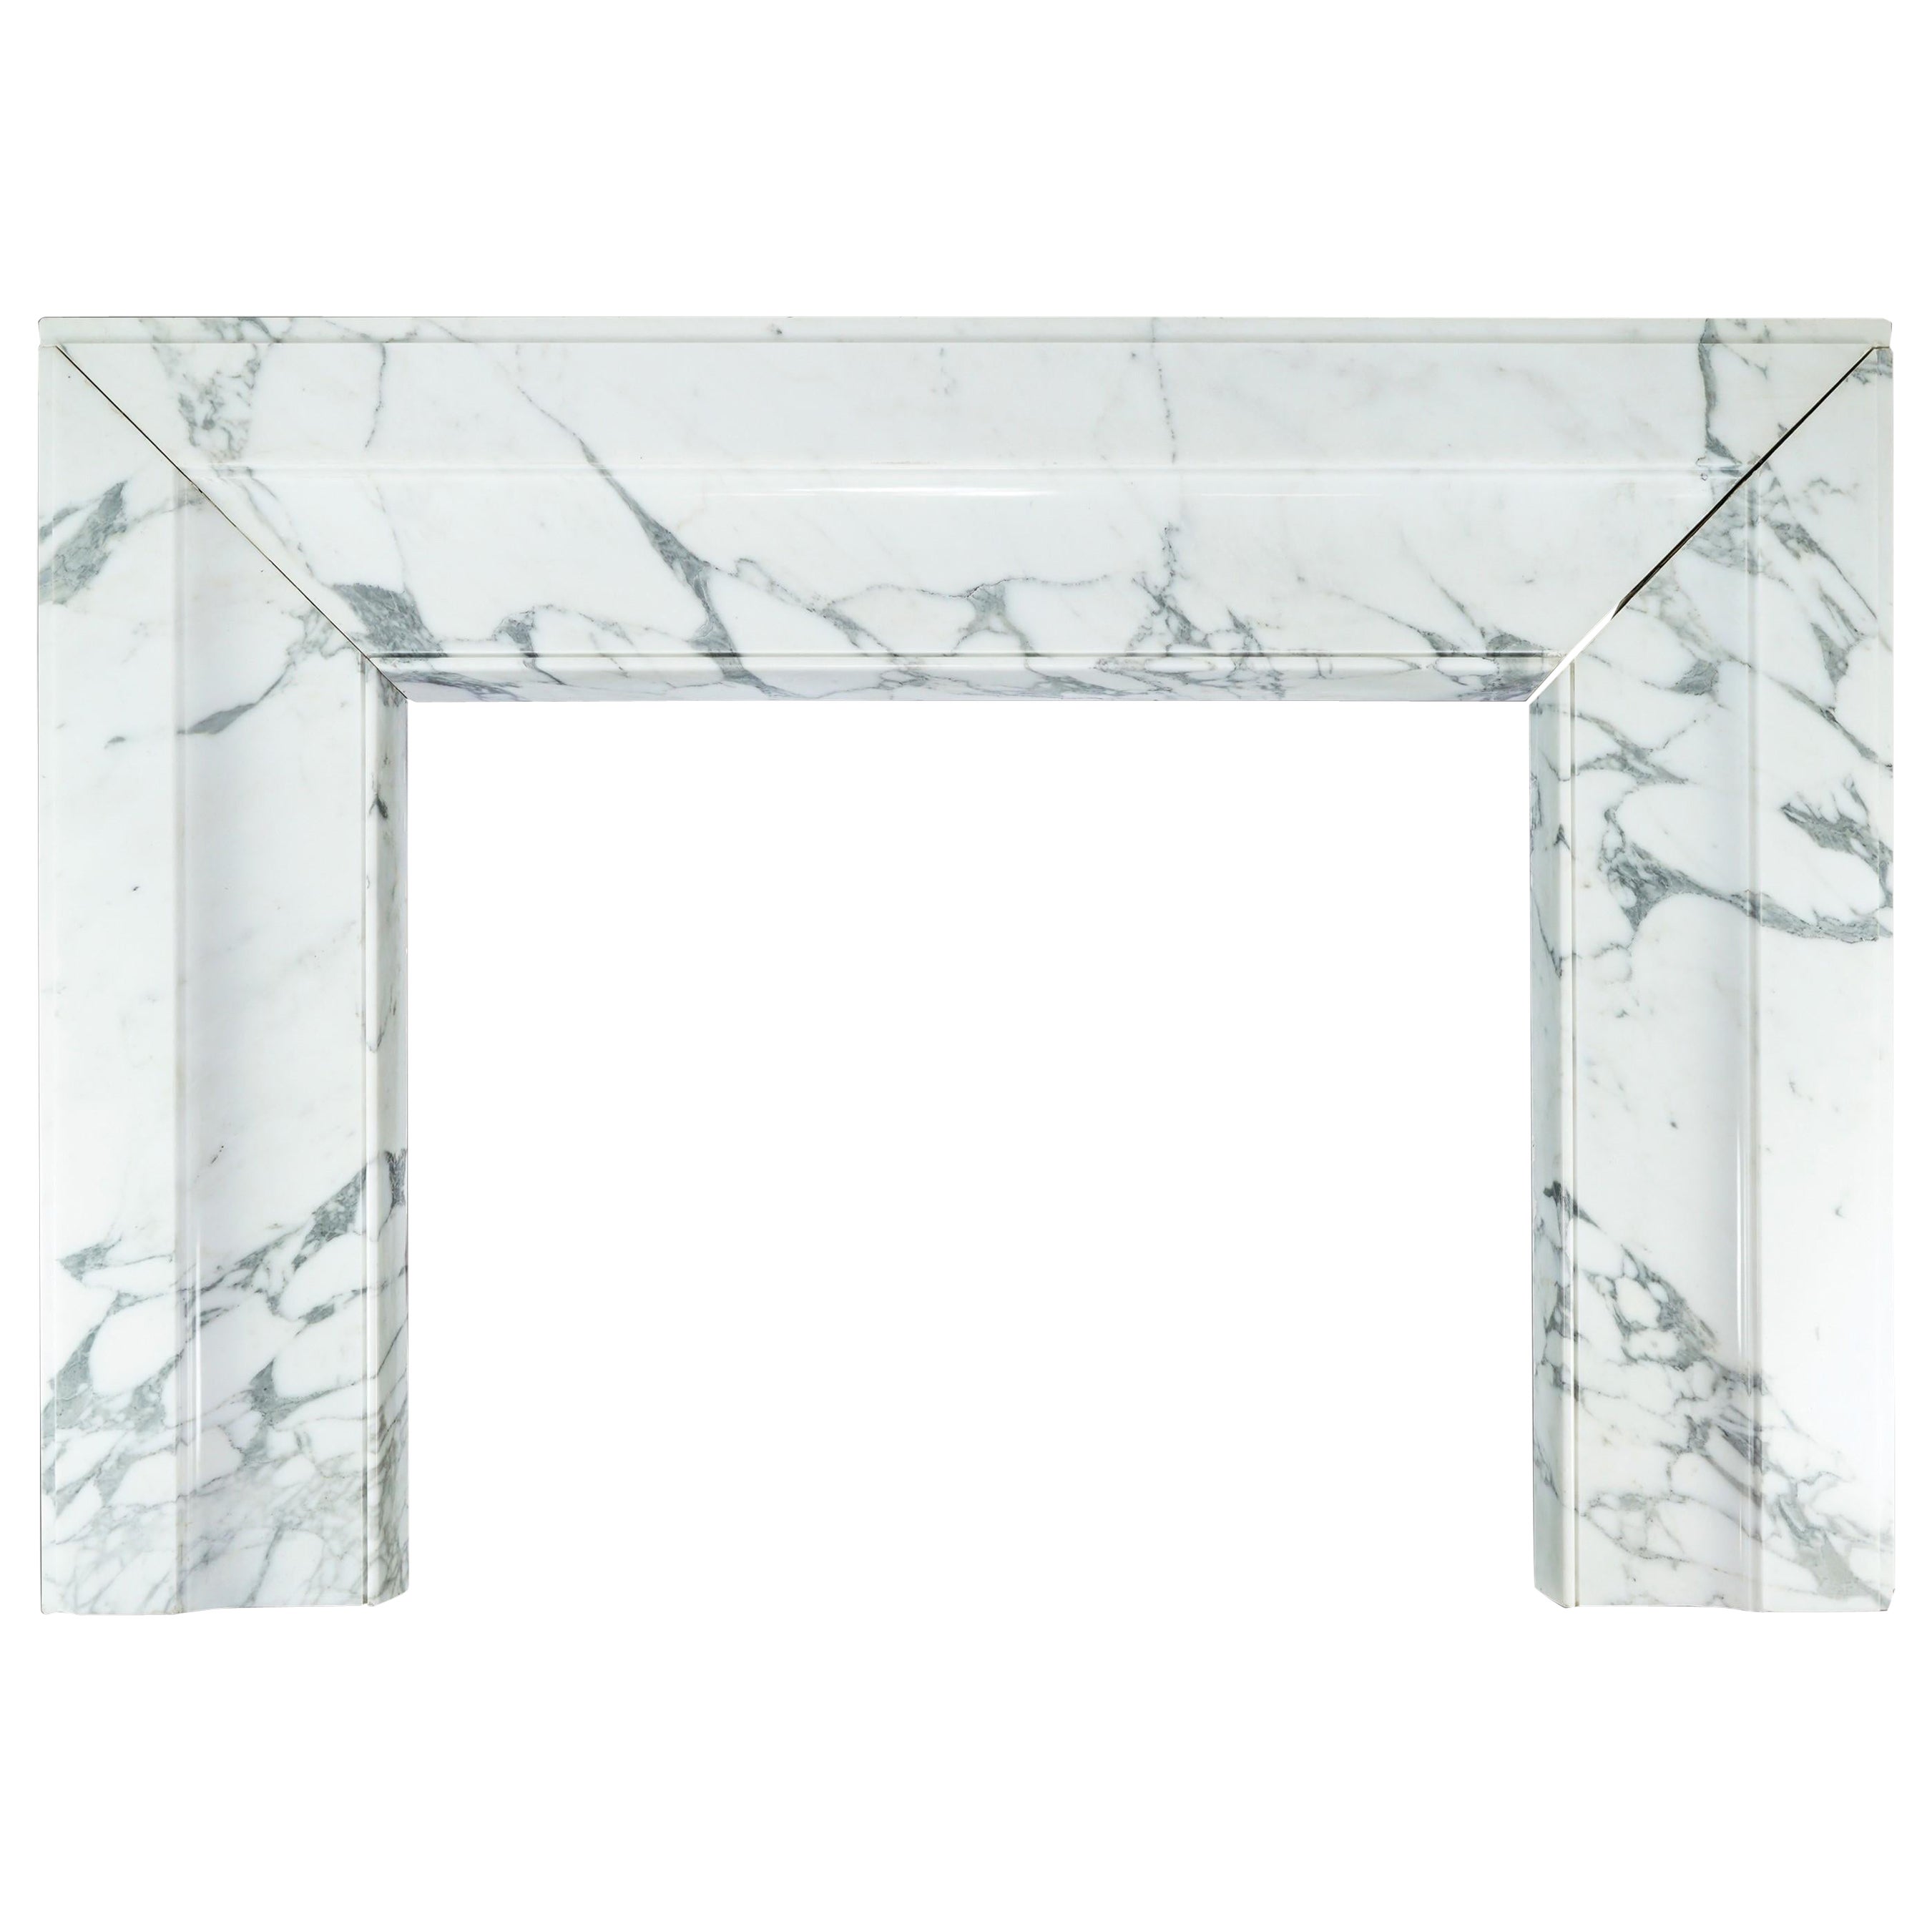 Carved Bolection Style White & Grey Veined Marble Mantel For Sale